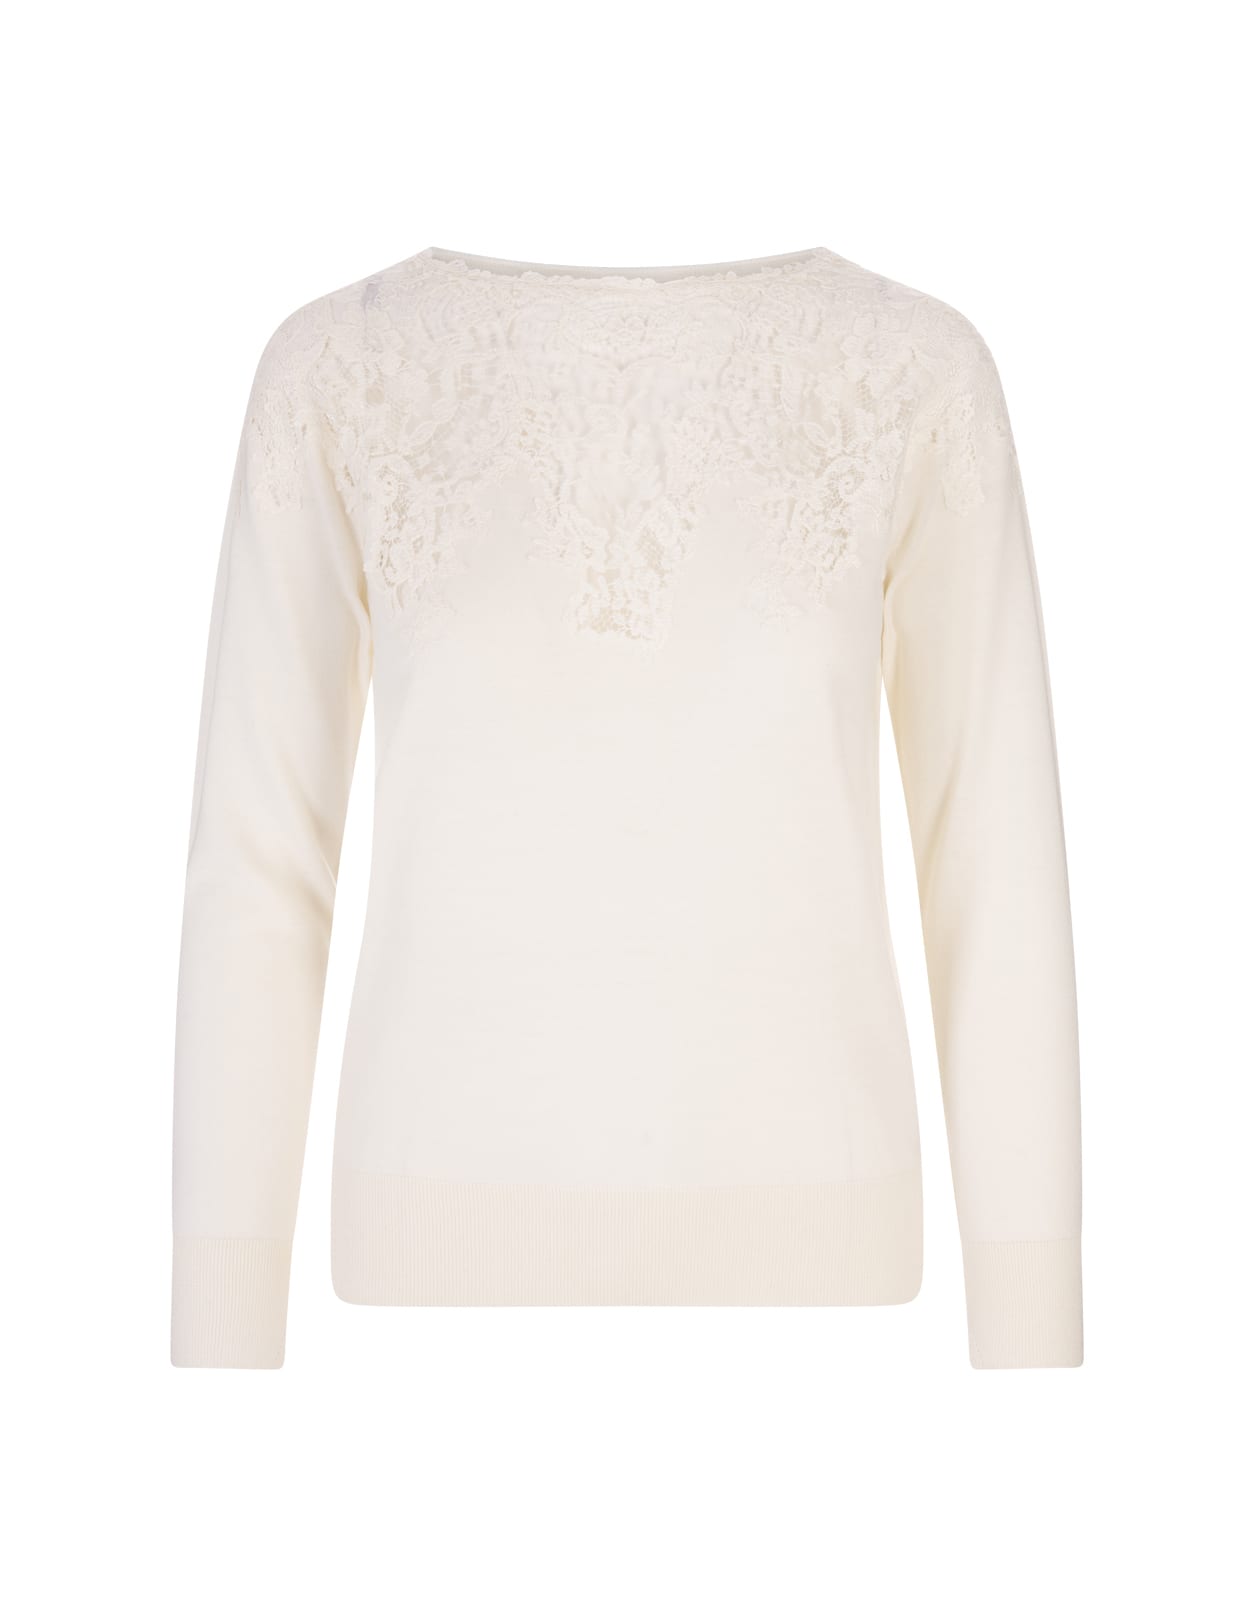 Ermanno Scervino White Wool Sweater With Lace Applications